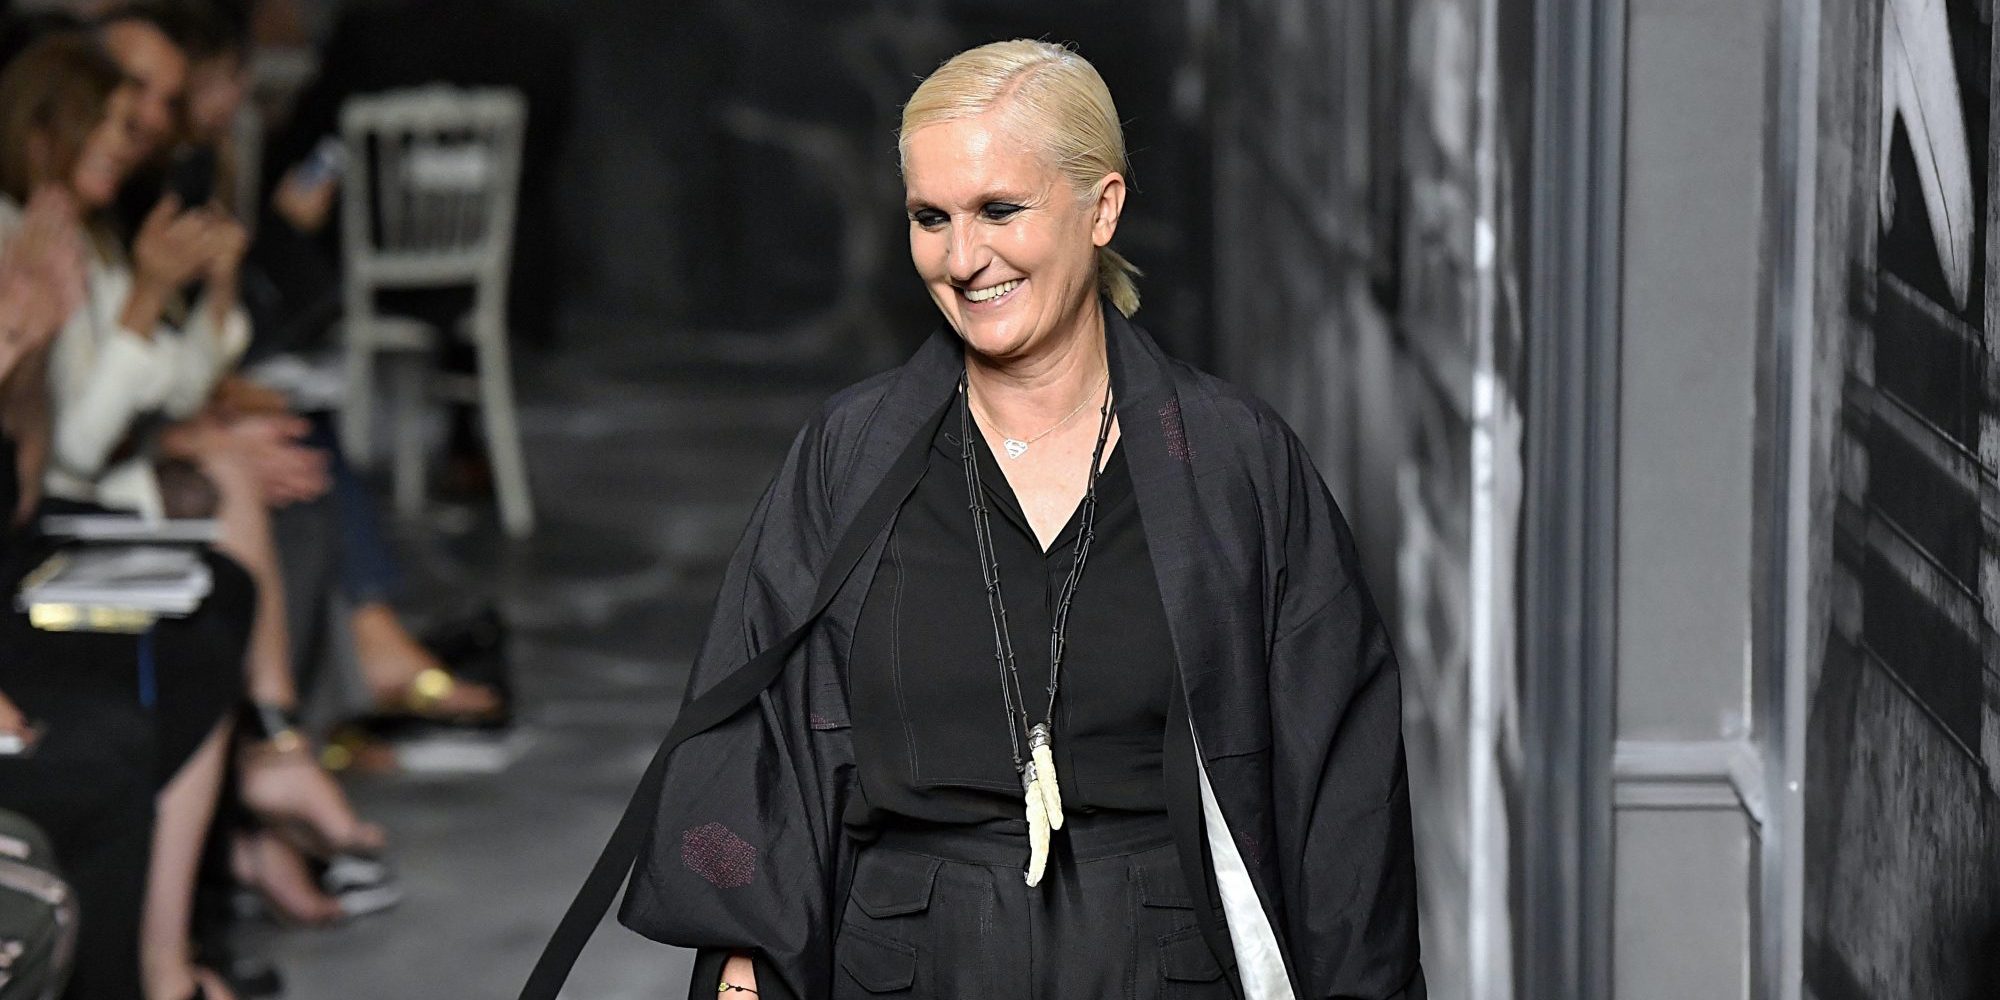 I want to emphasise the beauty of the country”: Maria Grazia Chiuri on  hosting Dior's Cruise 2022 collection in Athens